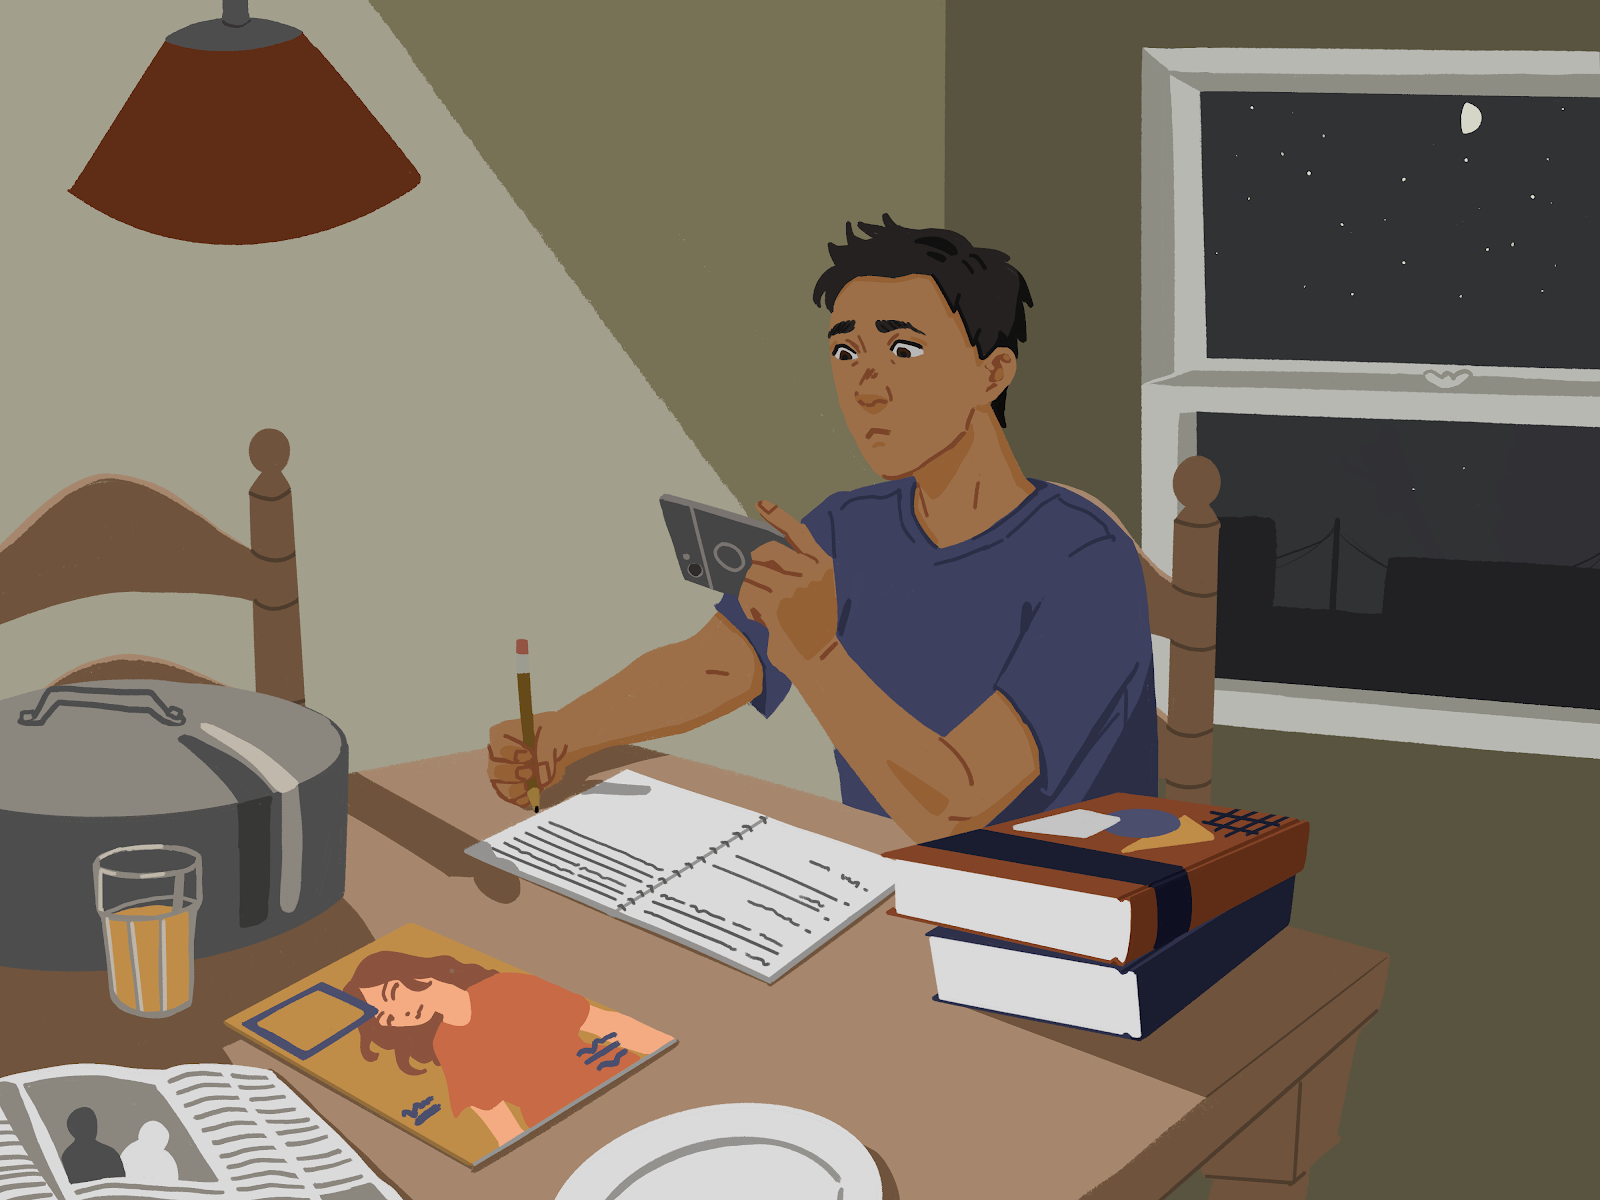 An illustration of a student looking at his phone while doing homework